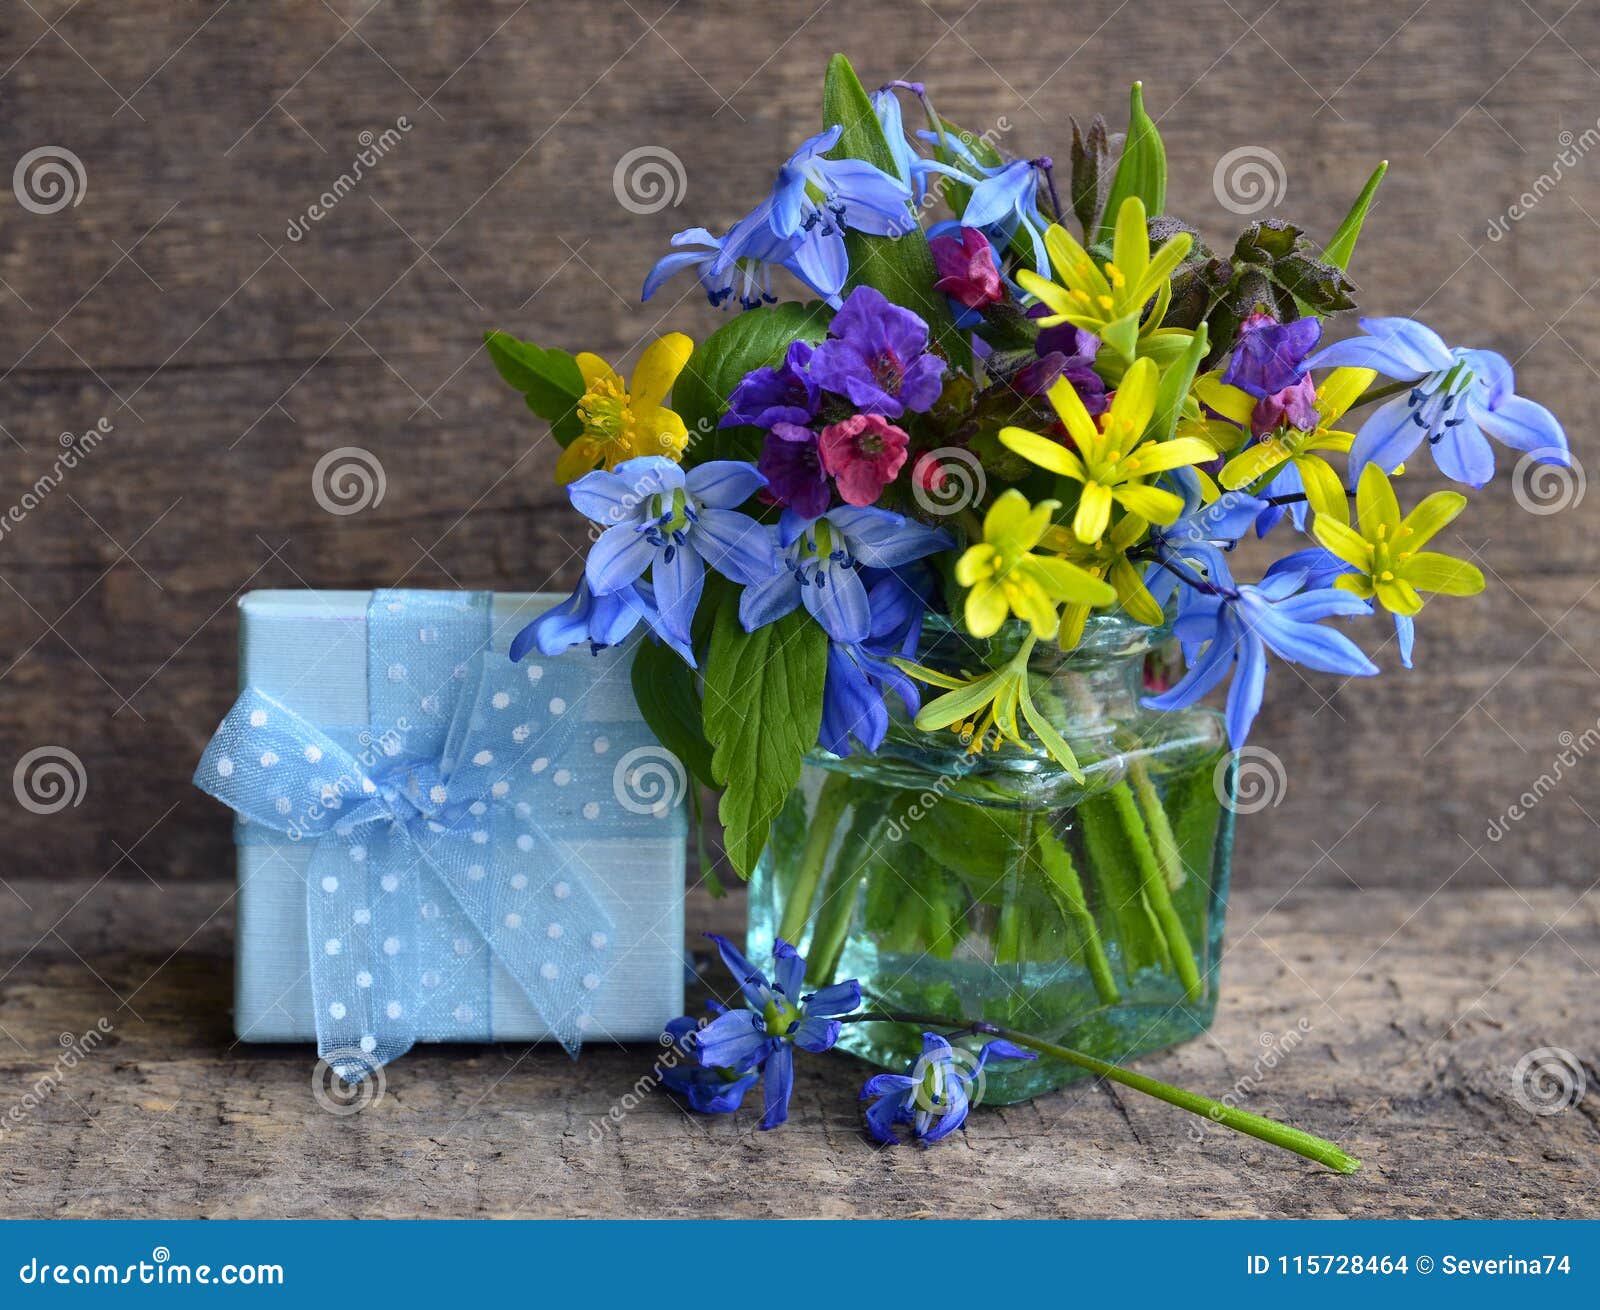 Bright Spring Flowers Bouquet in a Glass Vase and Gift Box on Old ...